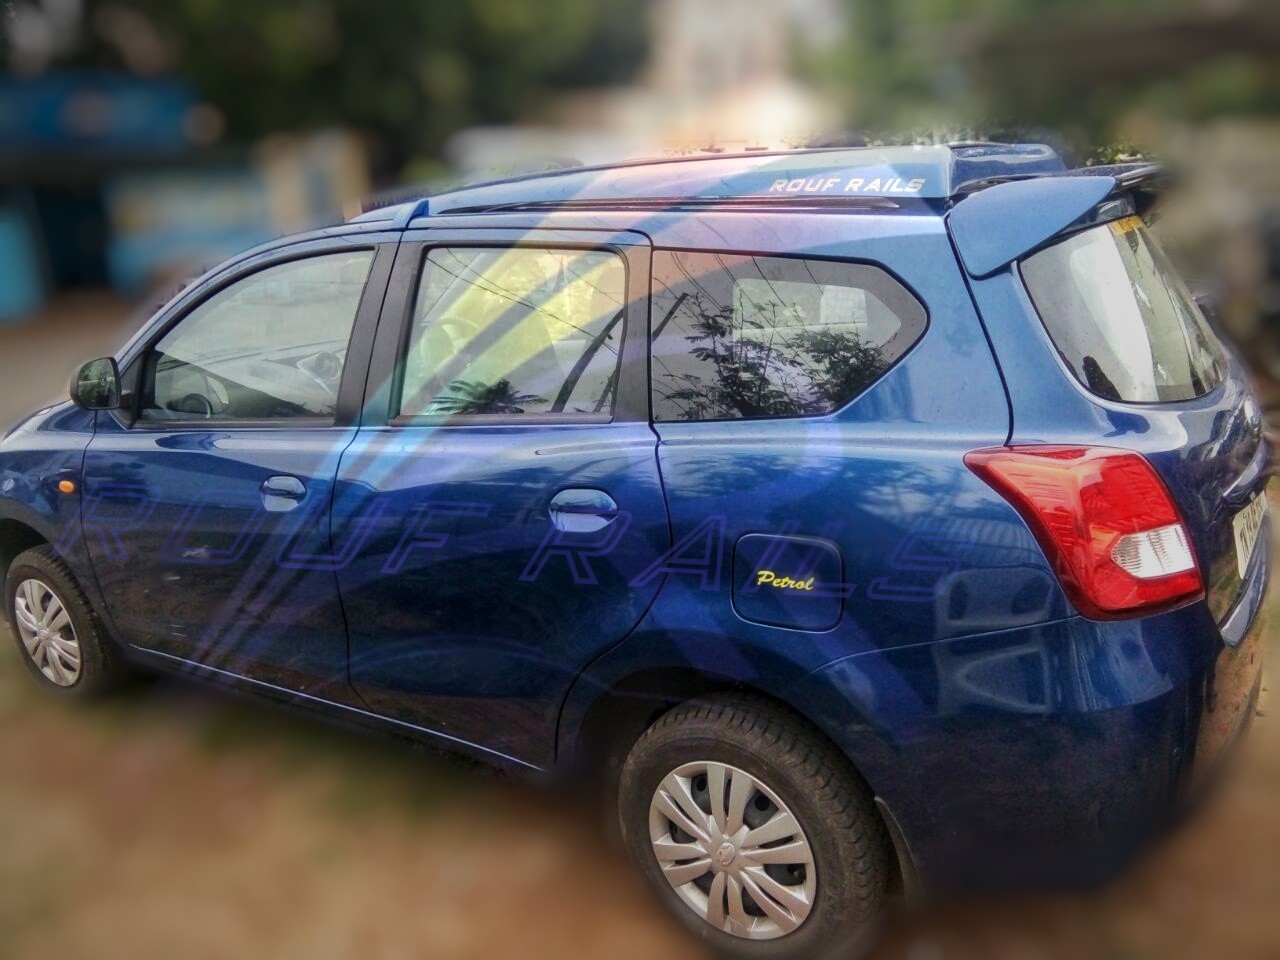 DATSUN GO PLUS CAR LUGGAGE CARRIER IN COIMBATORE